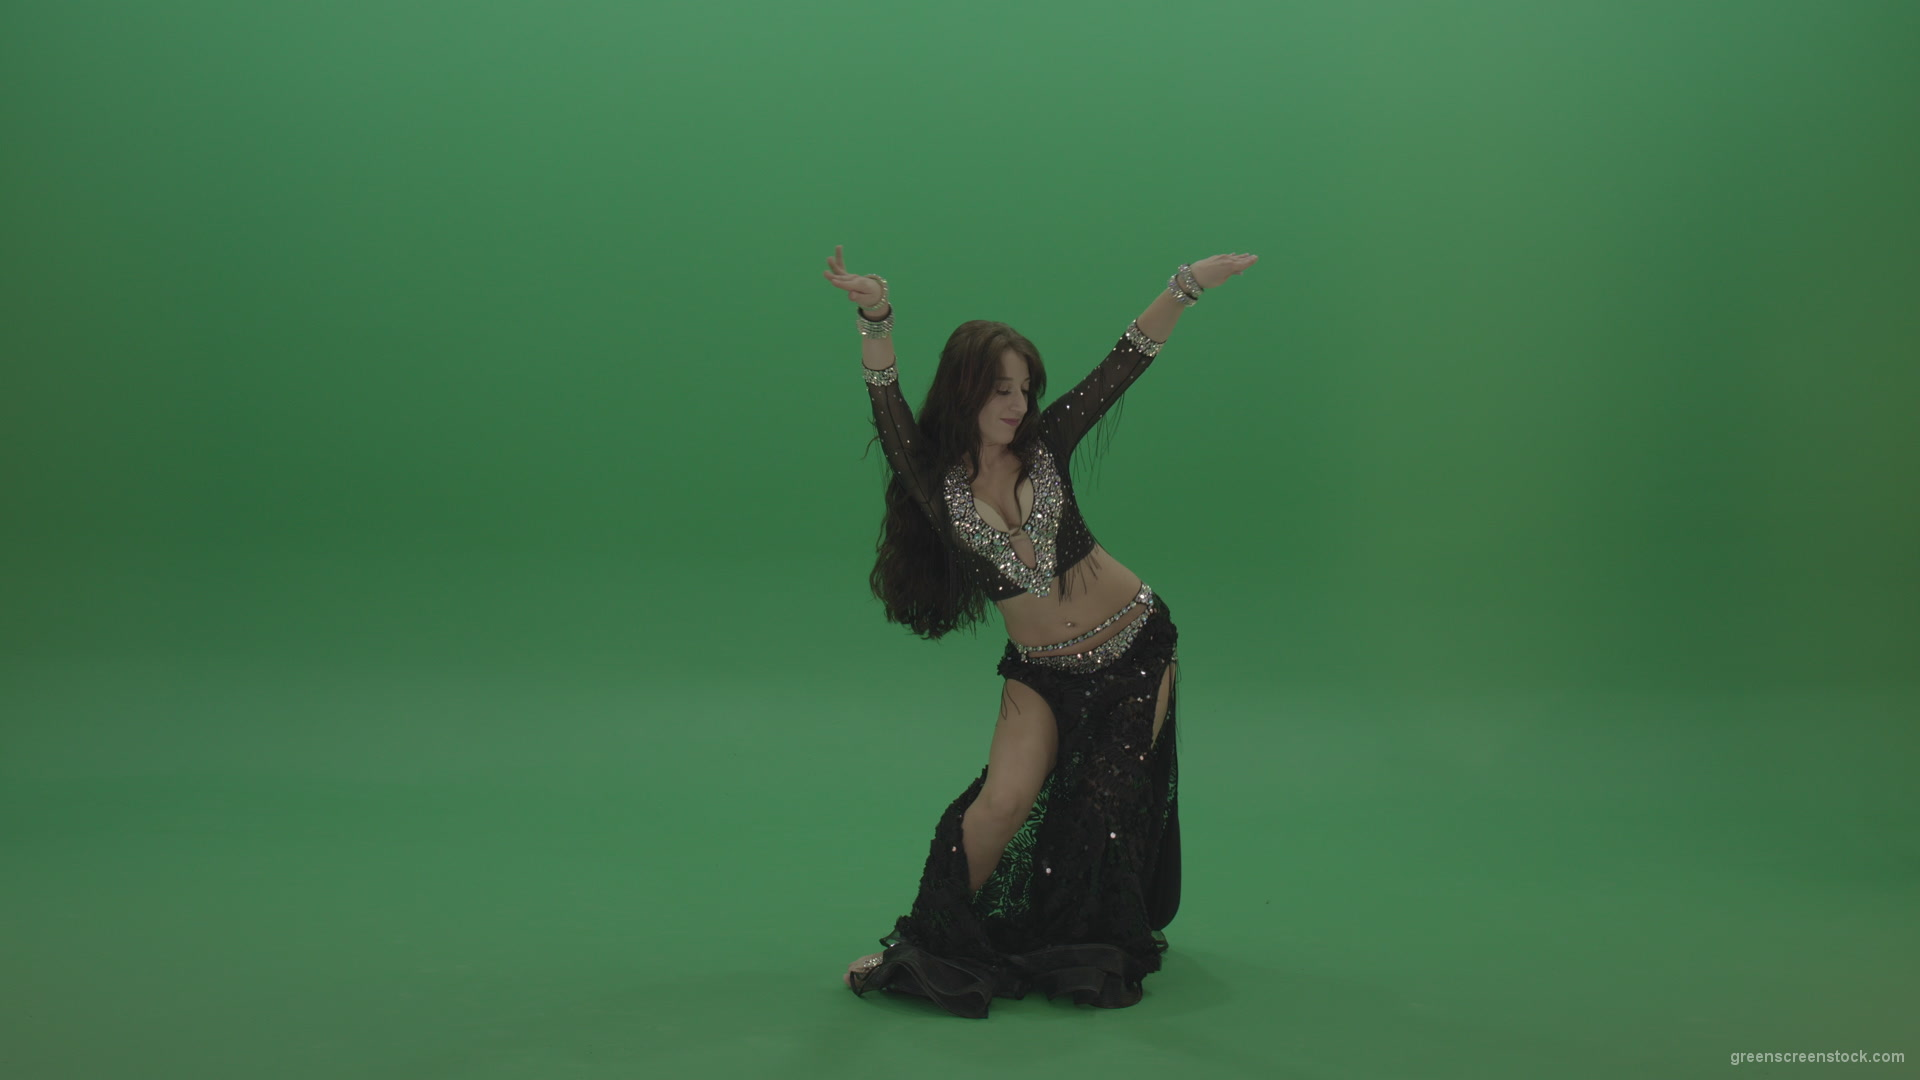 Admirable-belly-dancer-in-black-wear-display-amazing-dance-moves-over-chromakey-background_006 Green Screen Stock